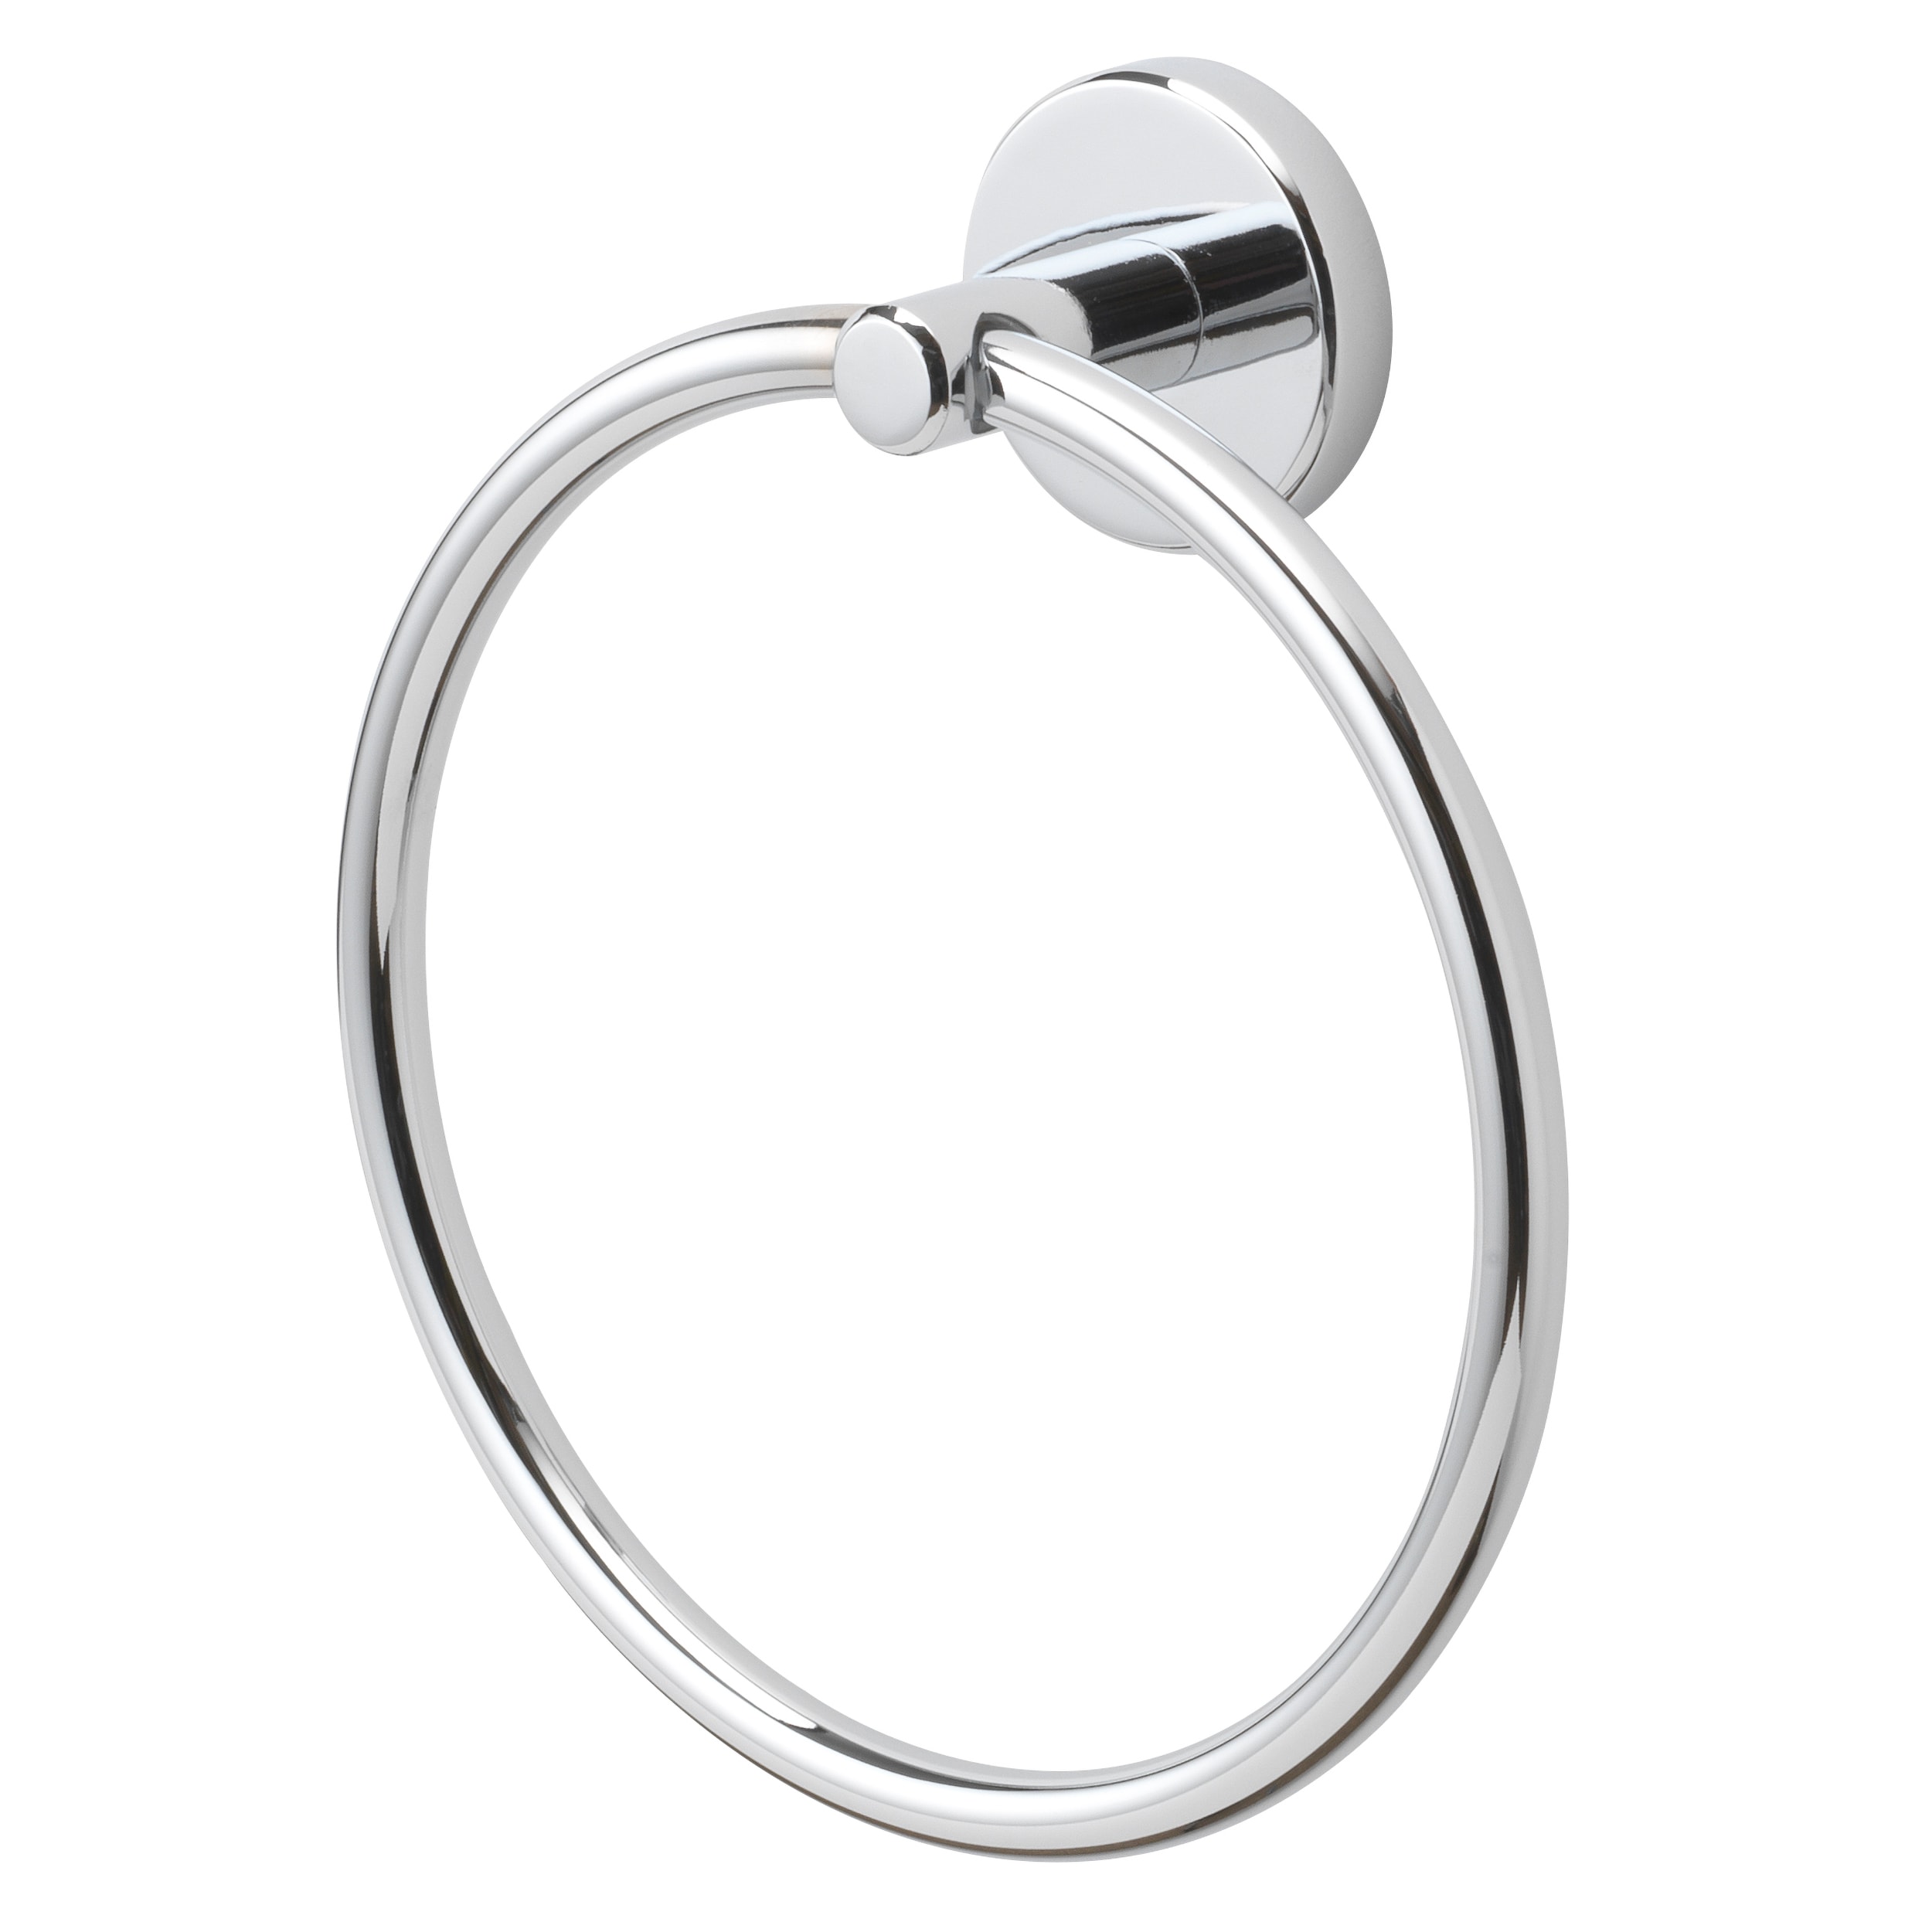 Allen + Roth Harlow Chrome Wall Mount Single Towel Ring | 166-HARTR-ARCH